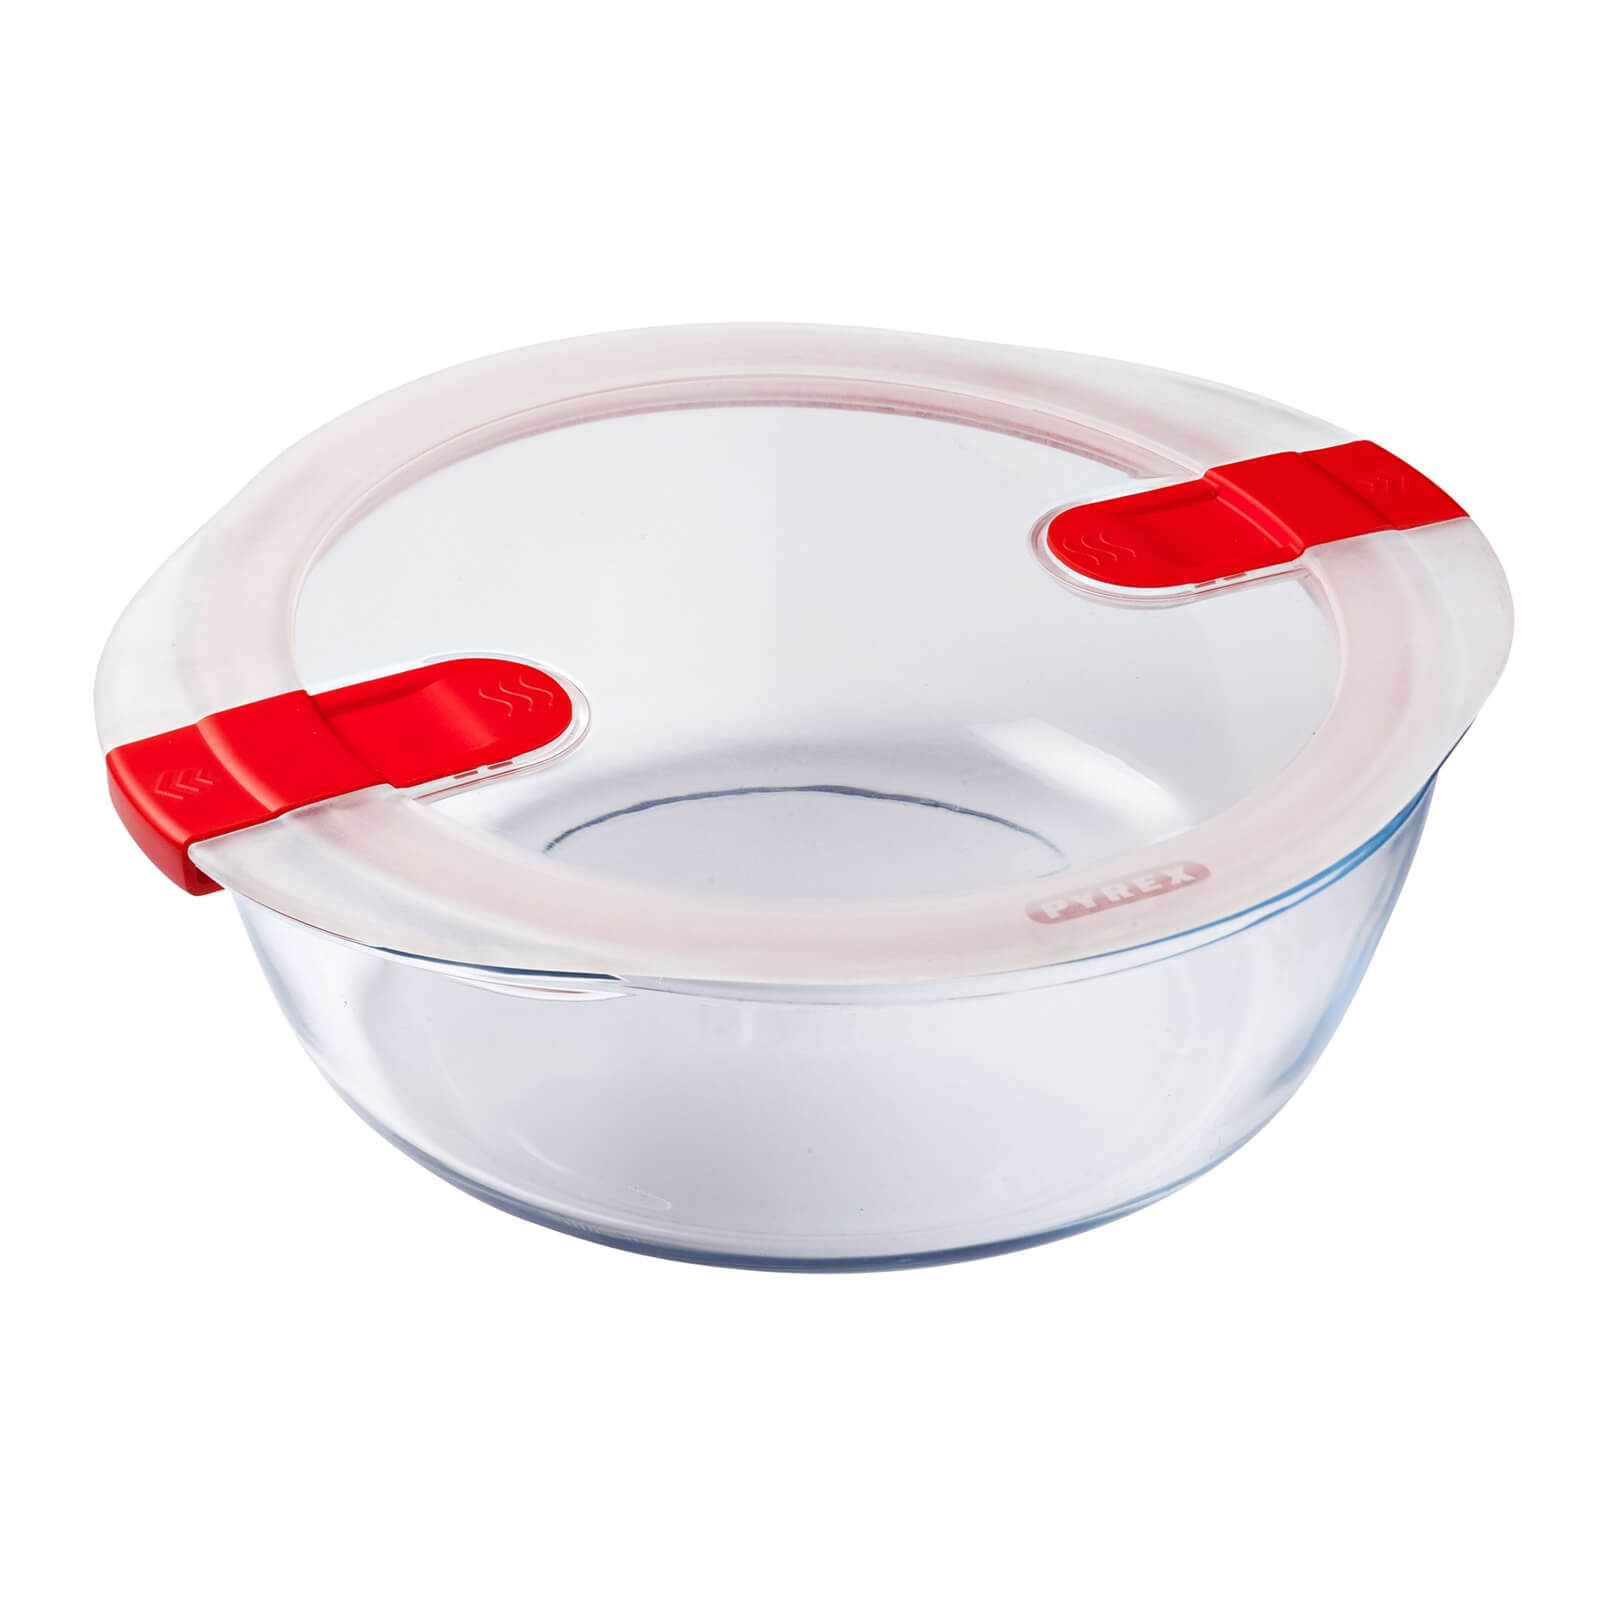 Photo of Pyrex Cook & Heat Round Dish With Lid